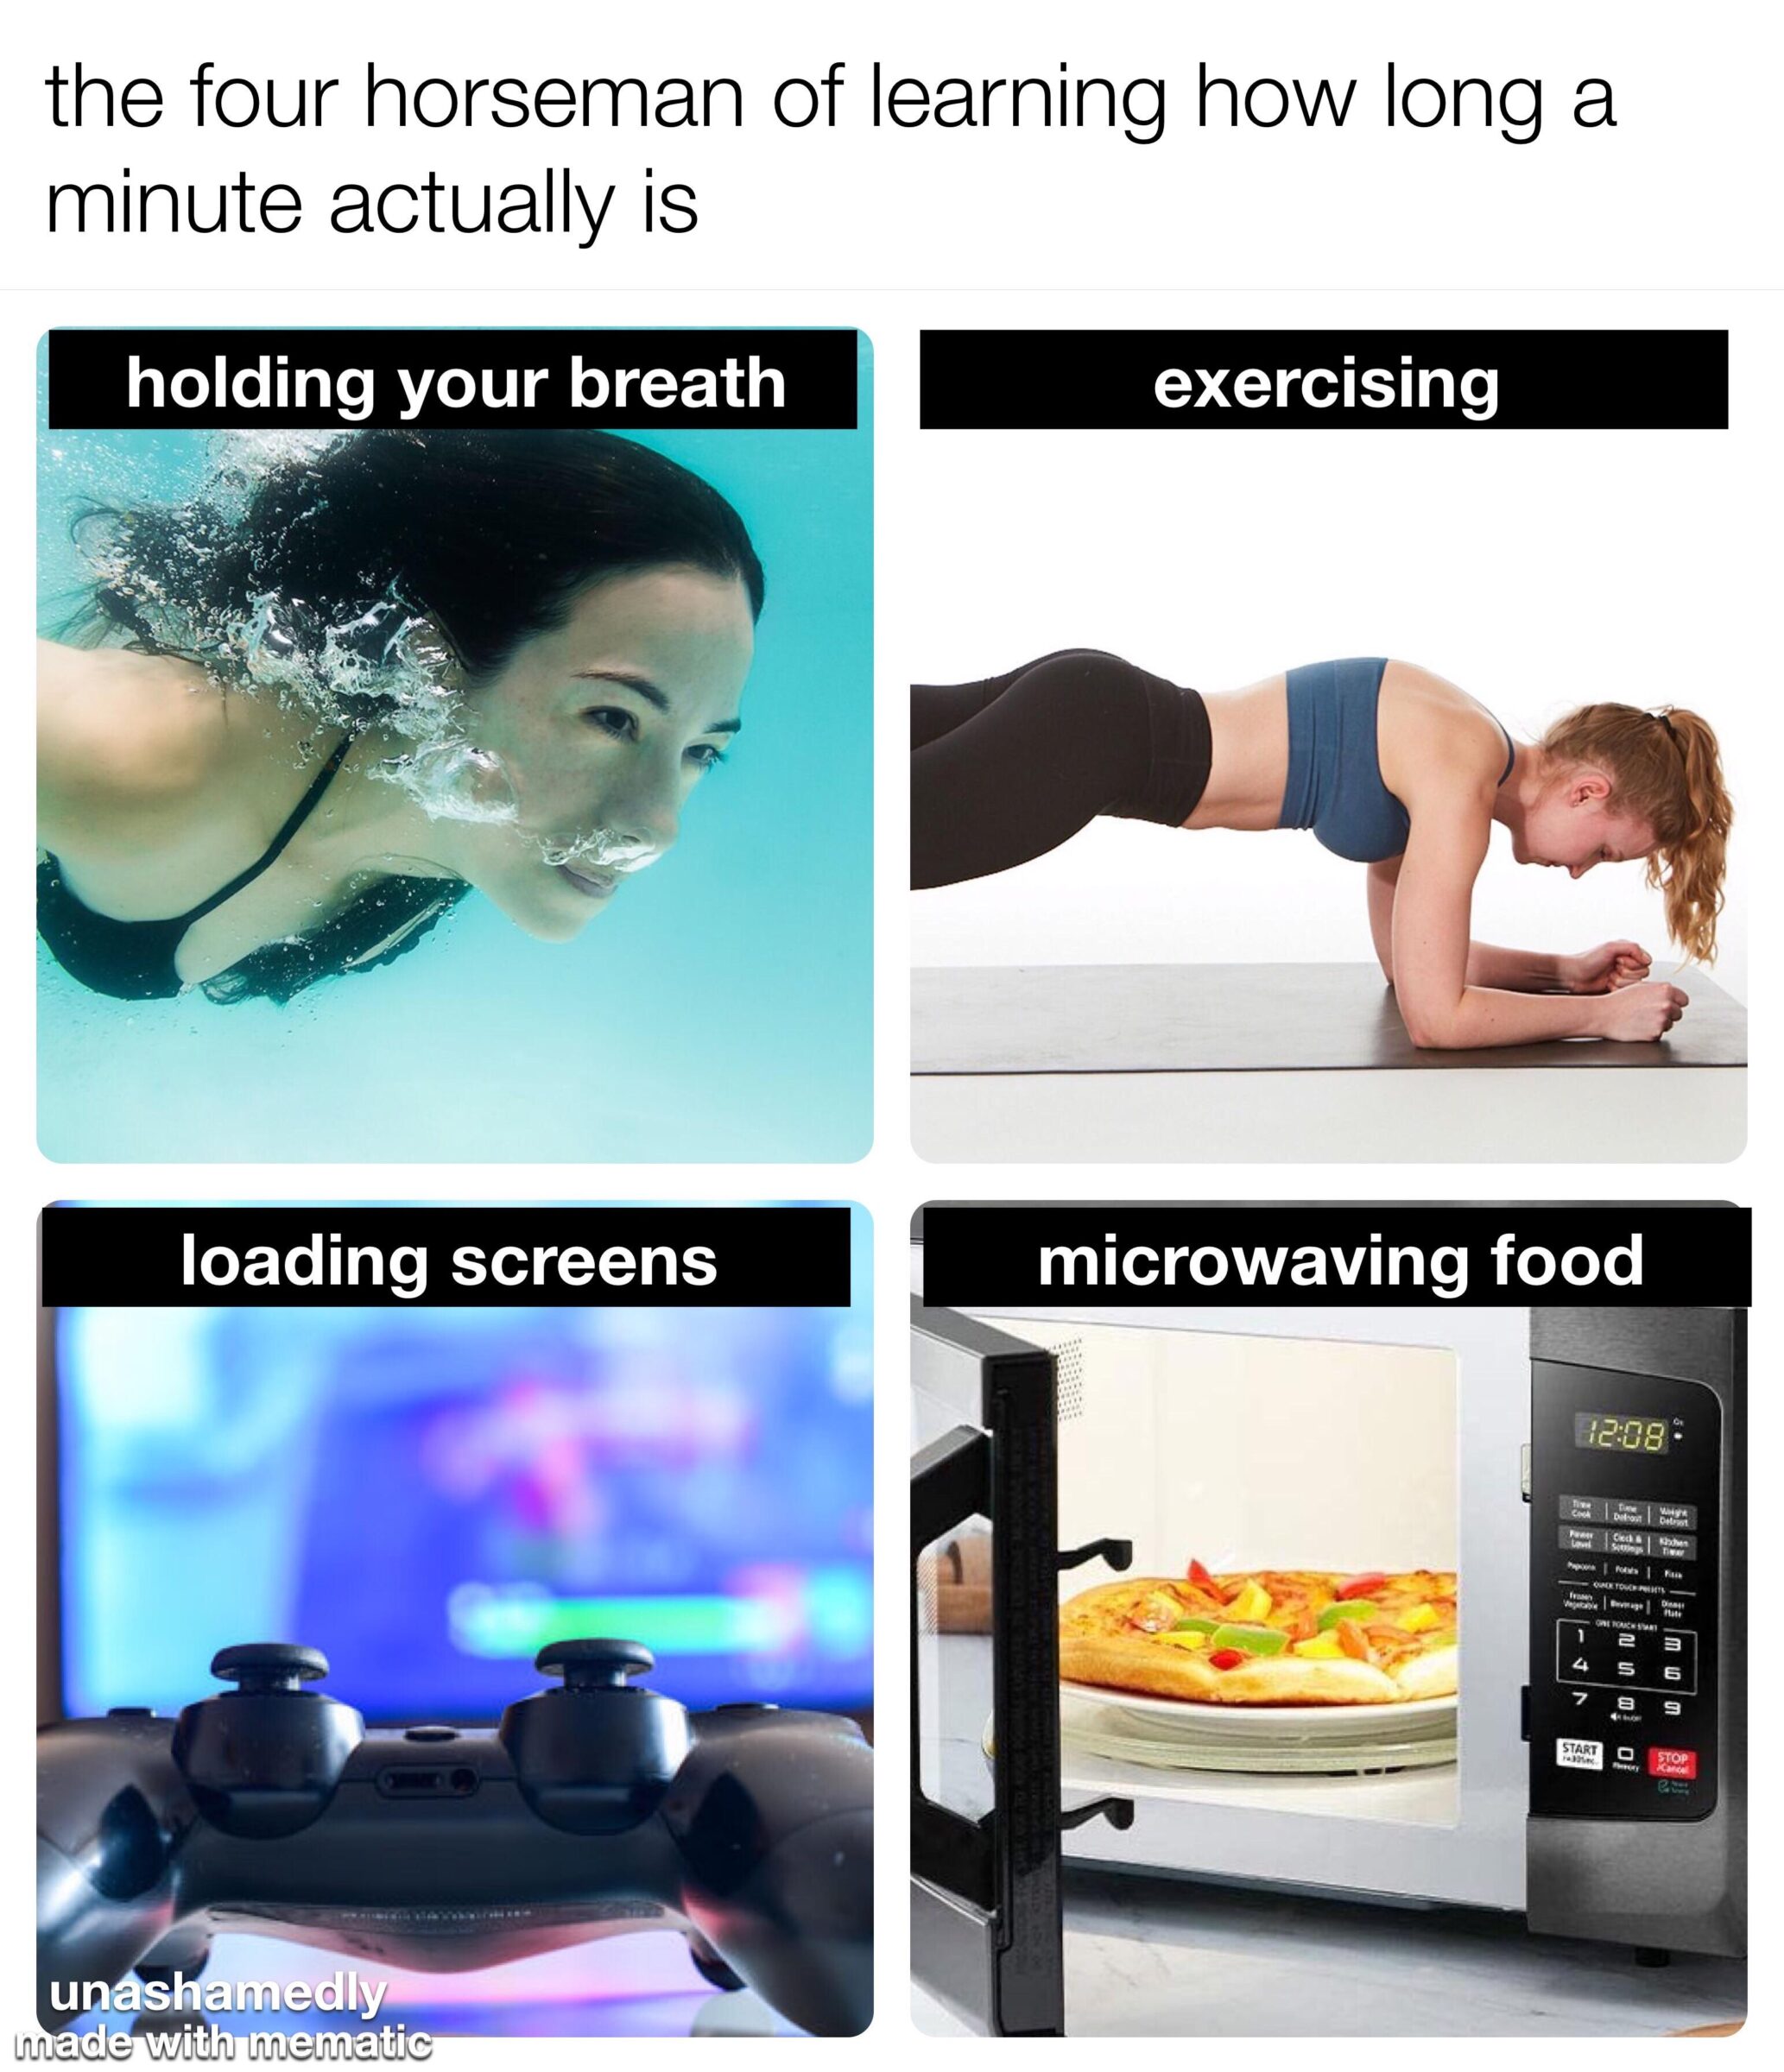 Funny, Waiting, Africa, SD, Please other memes Funny, Waiting, Africa, SD, Please text: the four horseman of learning how long a minute actually is holding your breath loading screens un s d with memati exercising microwaving food Oie.•oe• 